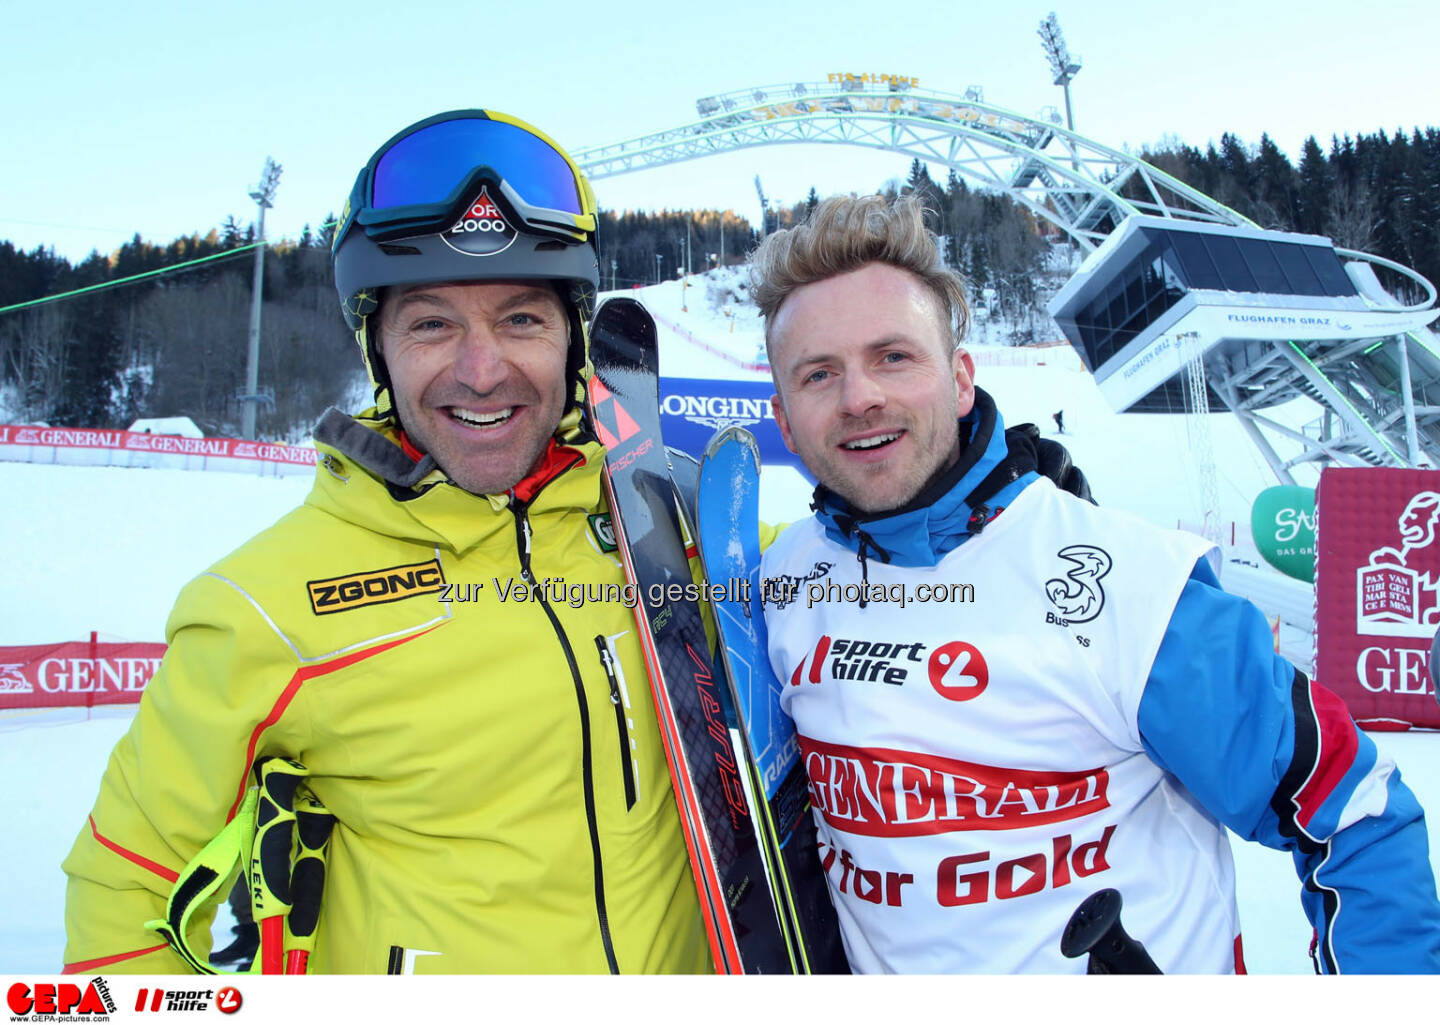 Ski for Gold Charity Race. Image shows Hans Knauss and Willi Gabalier. Photo: GEPA pictures/ Harald Steiner